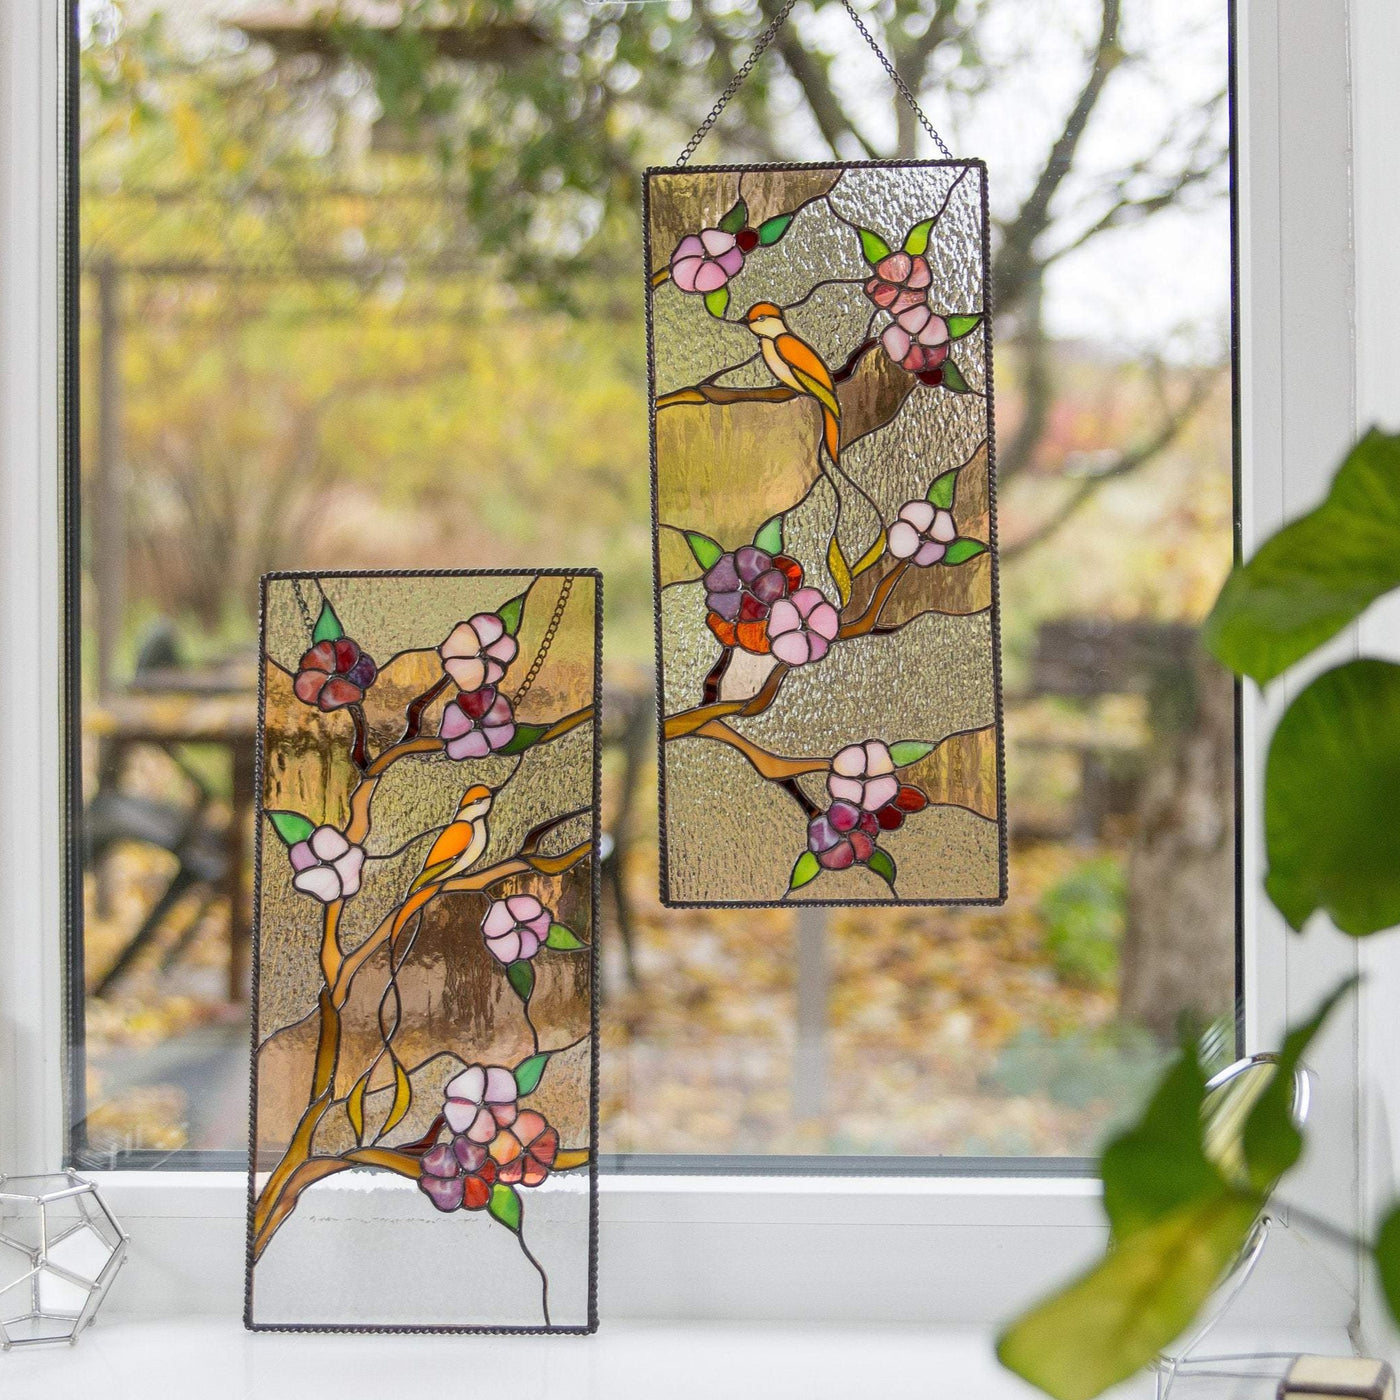 Stained glass panels with cherry blossom pattern